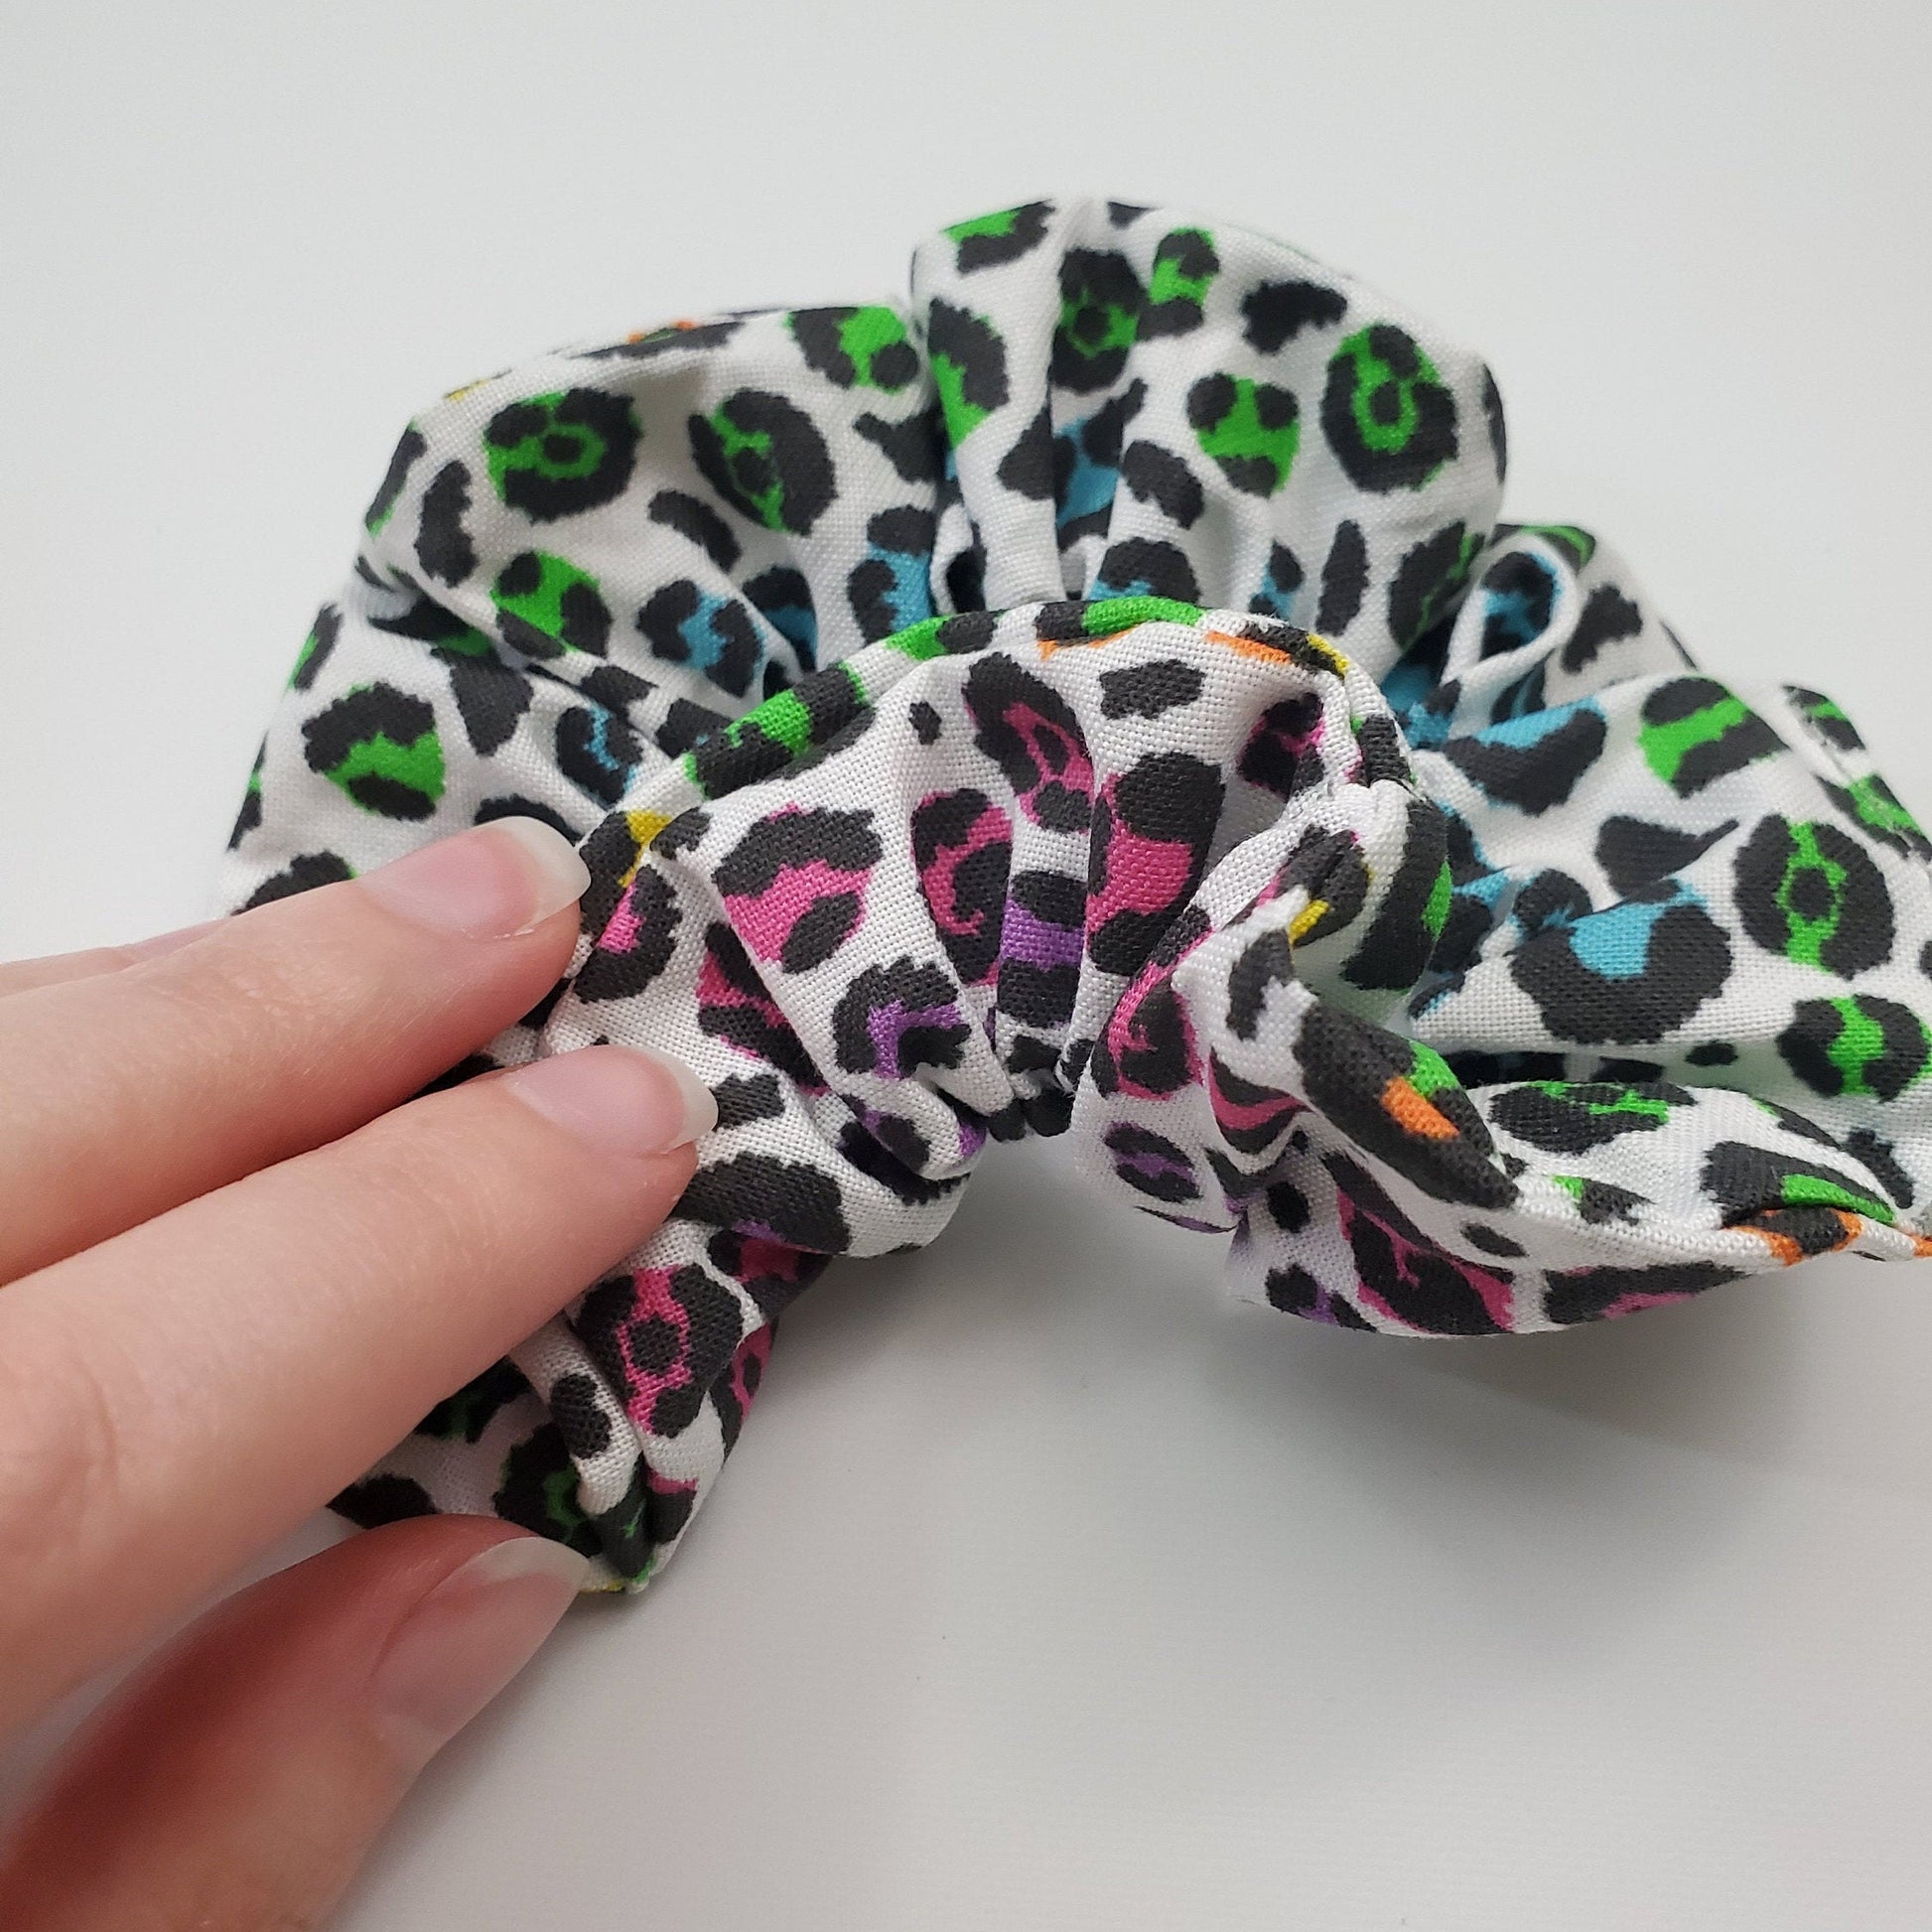 The rainbow cheetah print scrunchie being held to show both sides. This one has more green and blue on one side and pink and purple on the other.